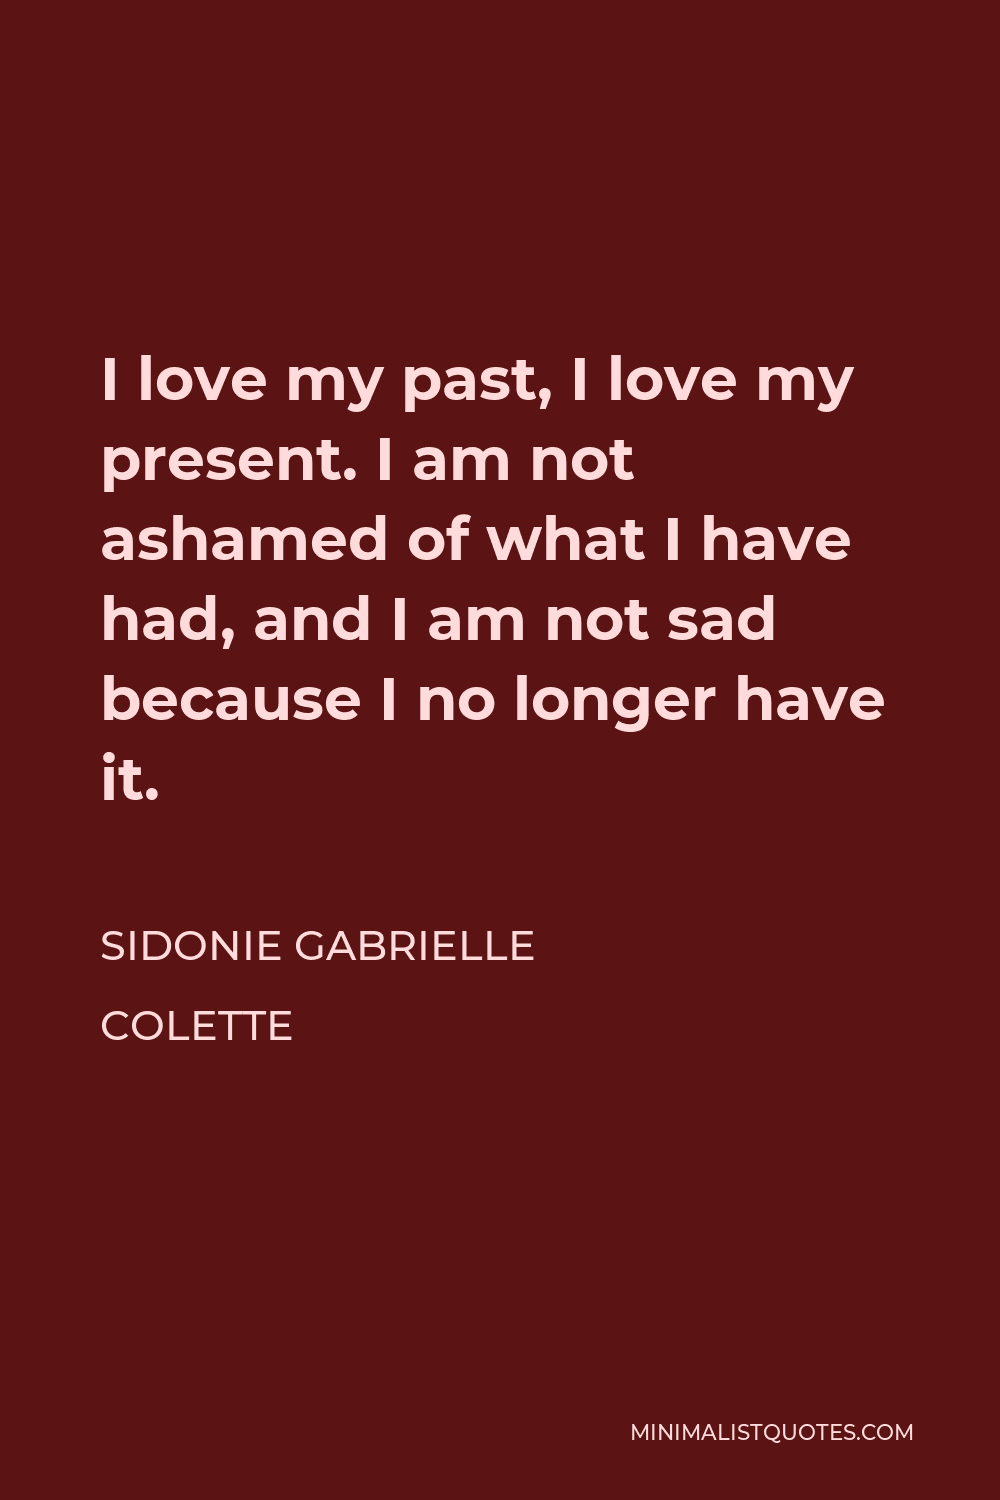 Sidonie Gabrielle Colette Quote - I love my past, I love my present. I am not ashamed of what I have had, and I am not sad because I no longer have it.